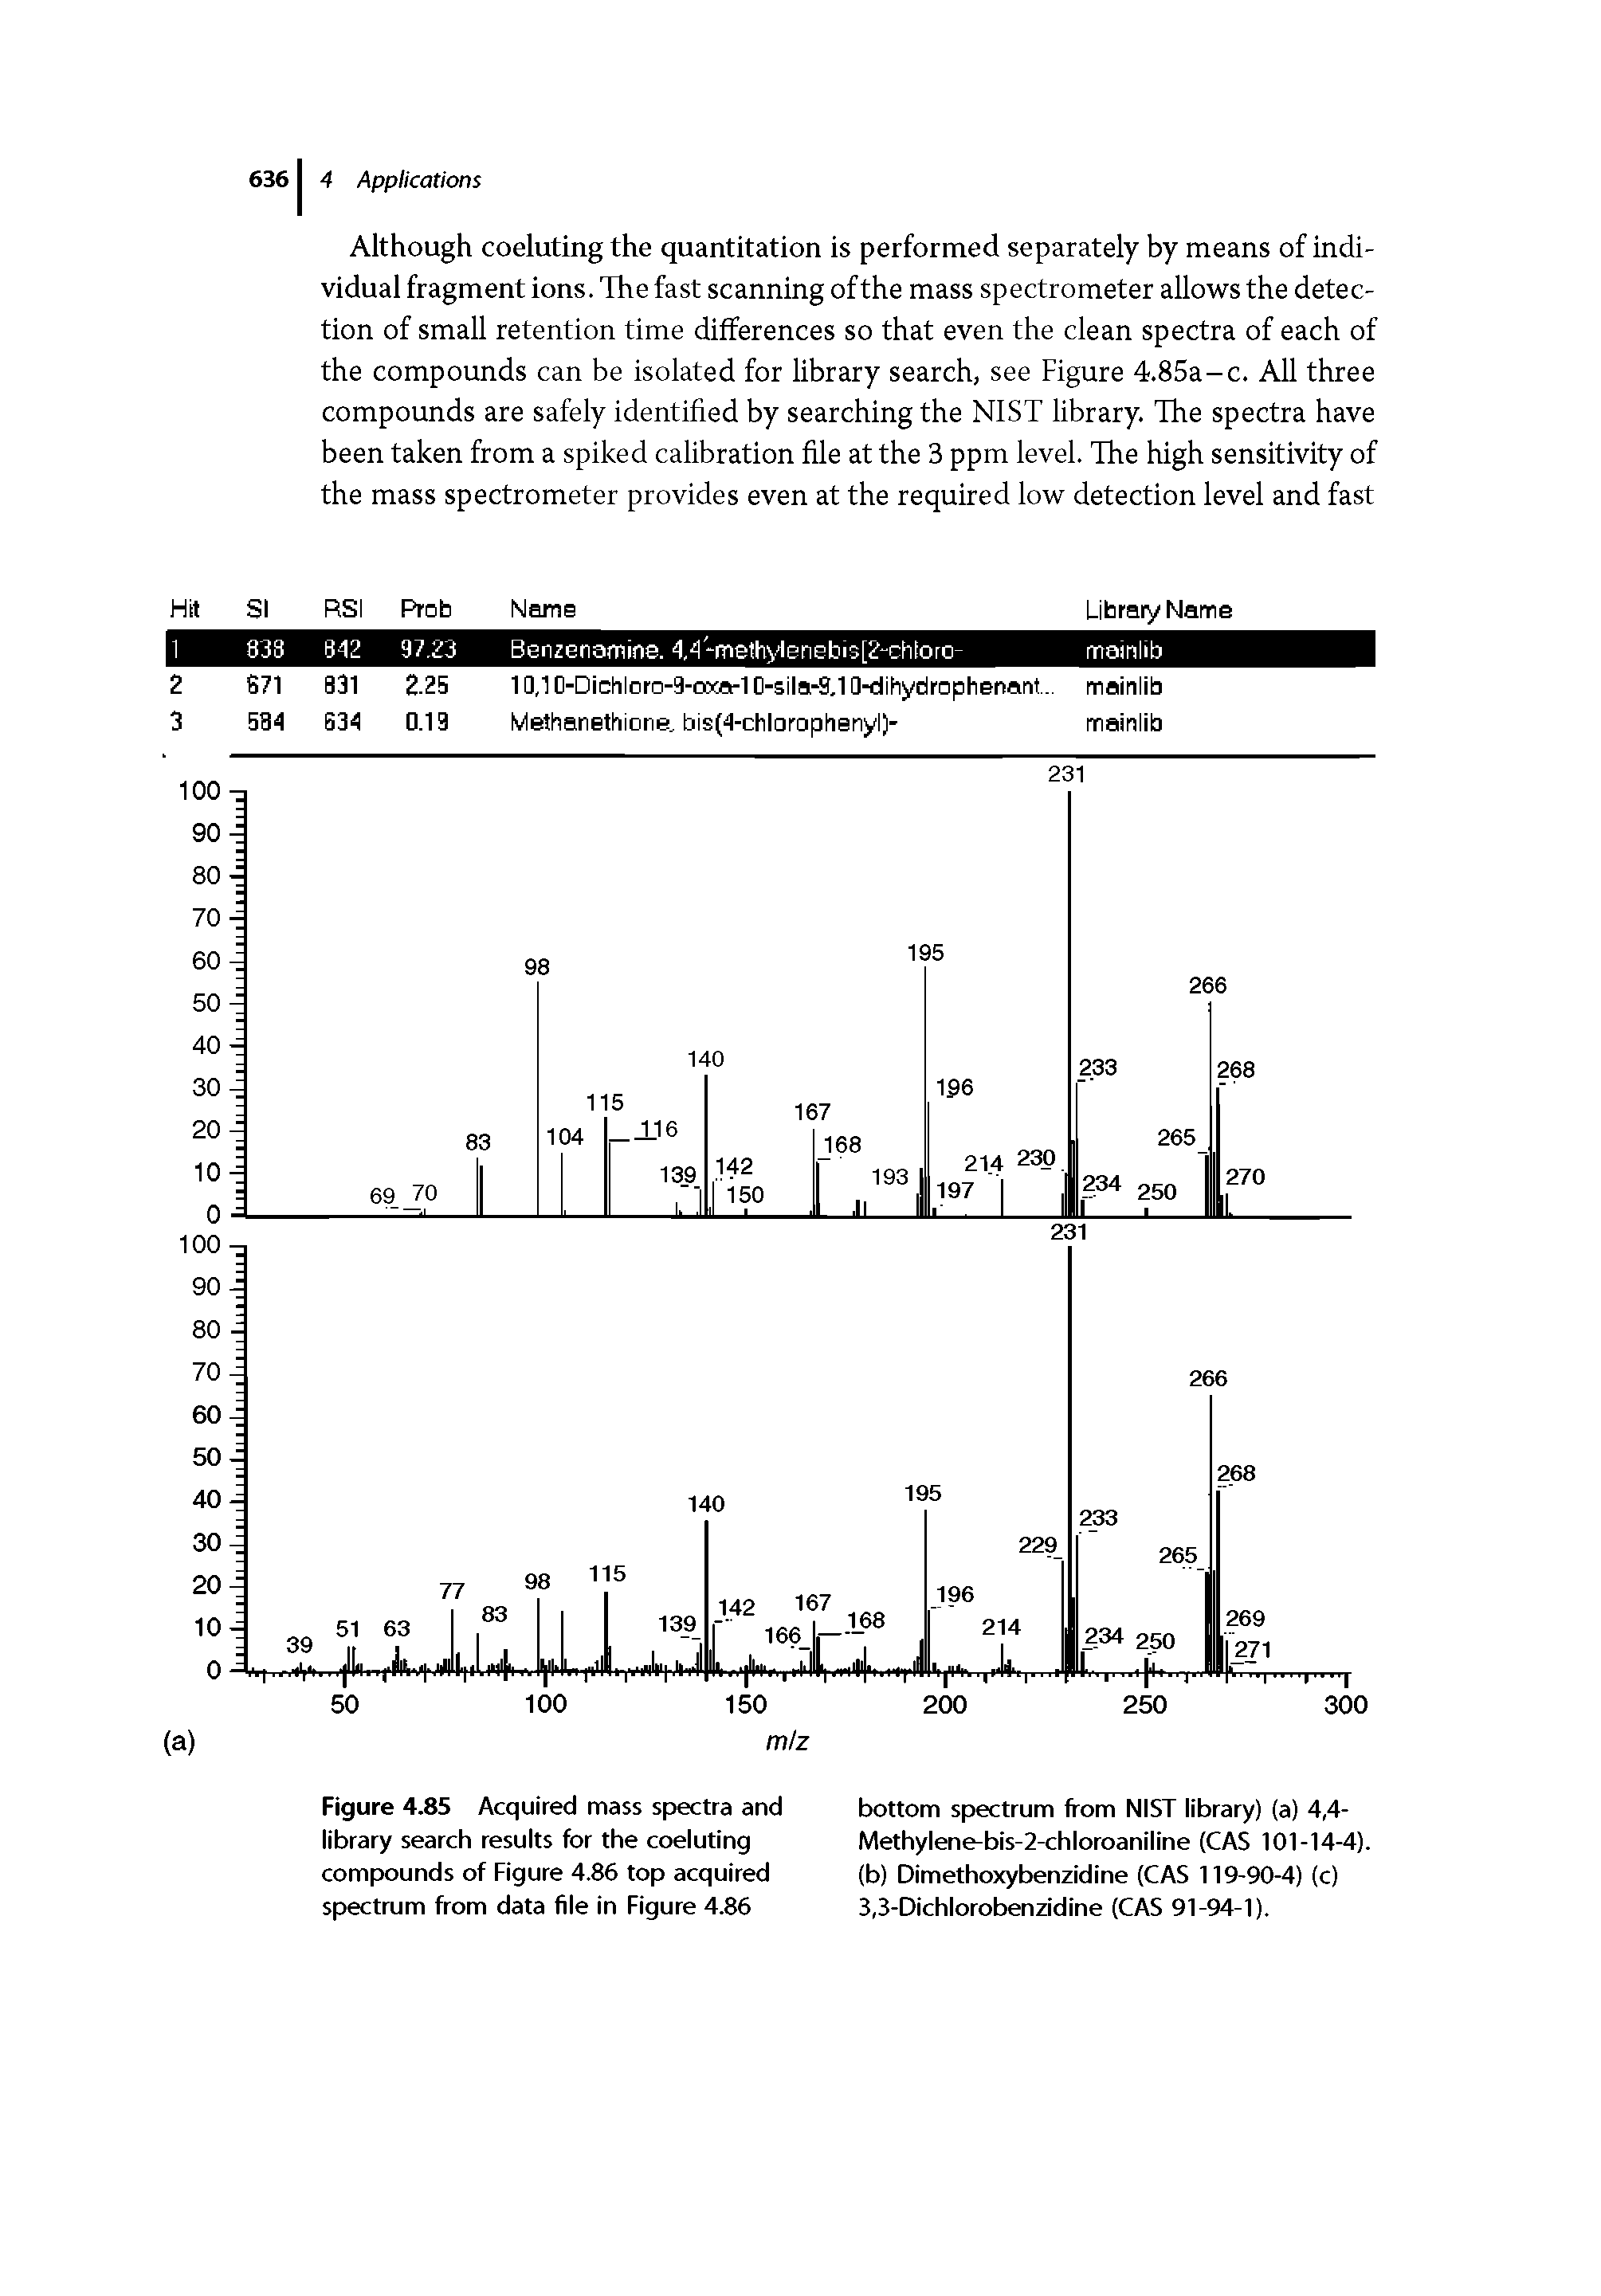 Figure 4.85 Acquired mass spectra and library search results for the coeluting compounds of Figure 4.86 top acquired spectrum from data file in Figure 4.86...